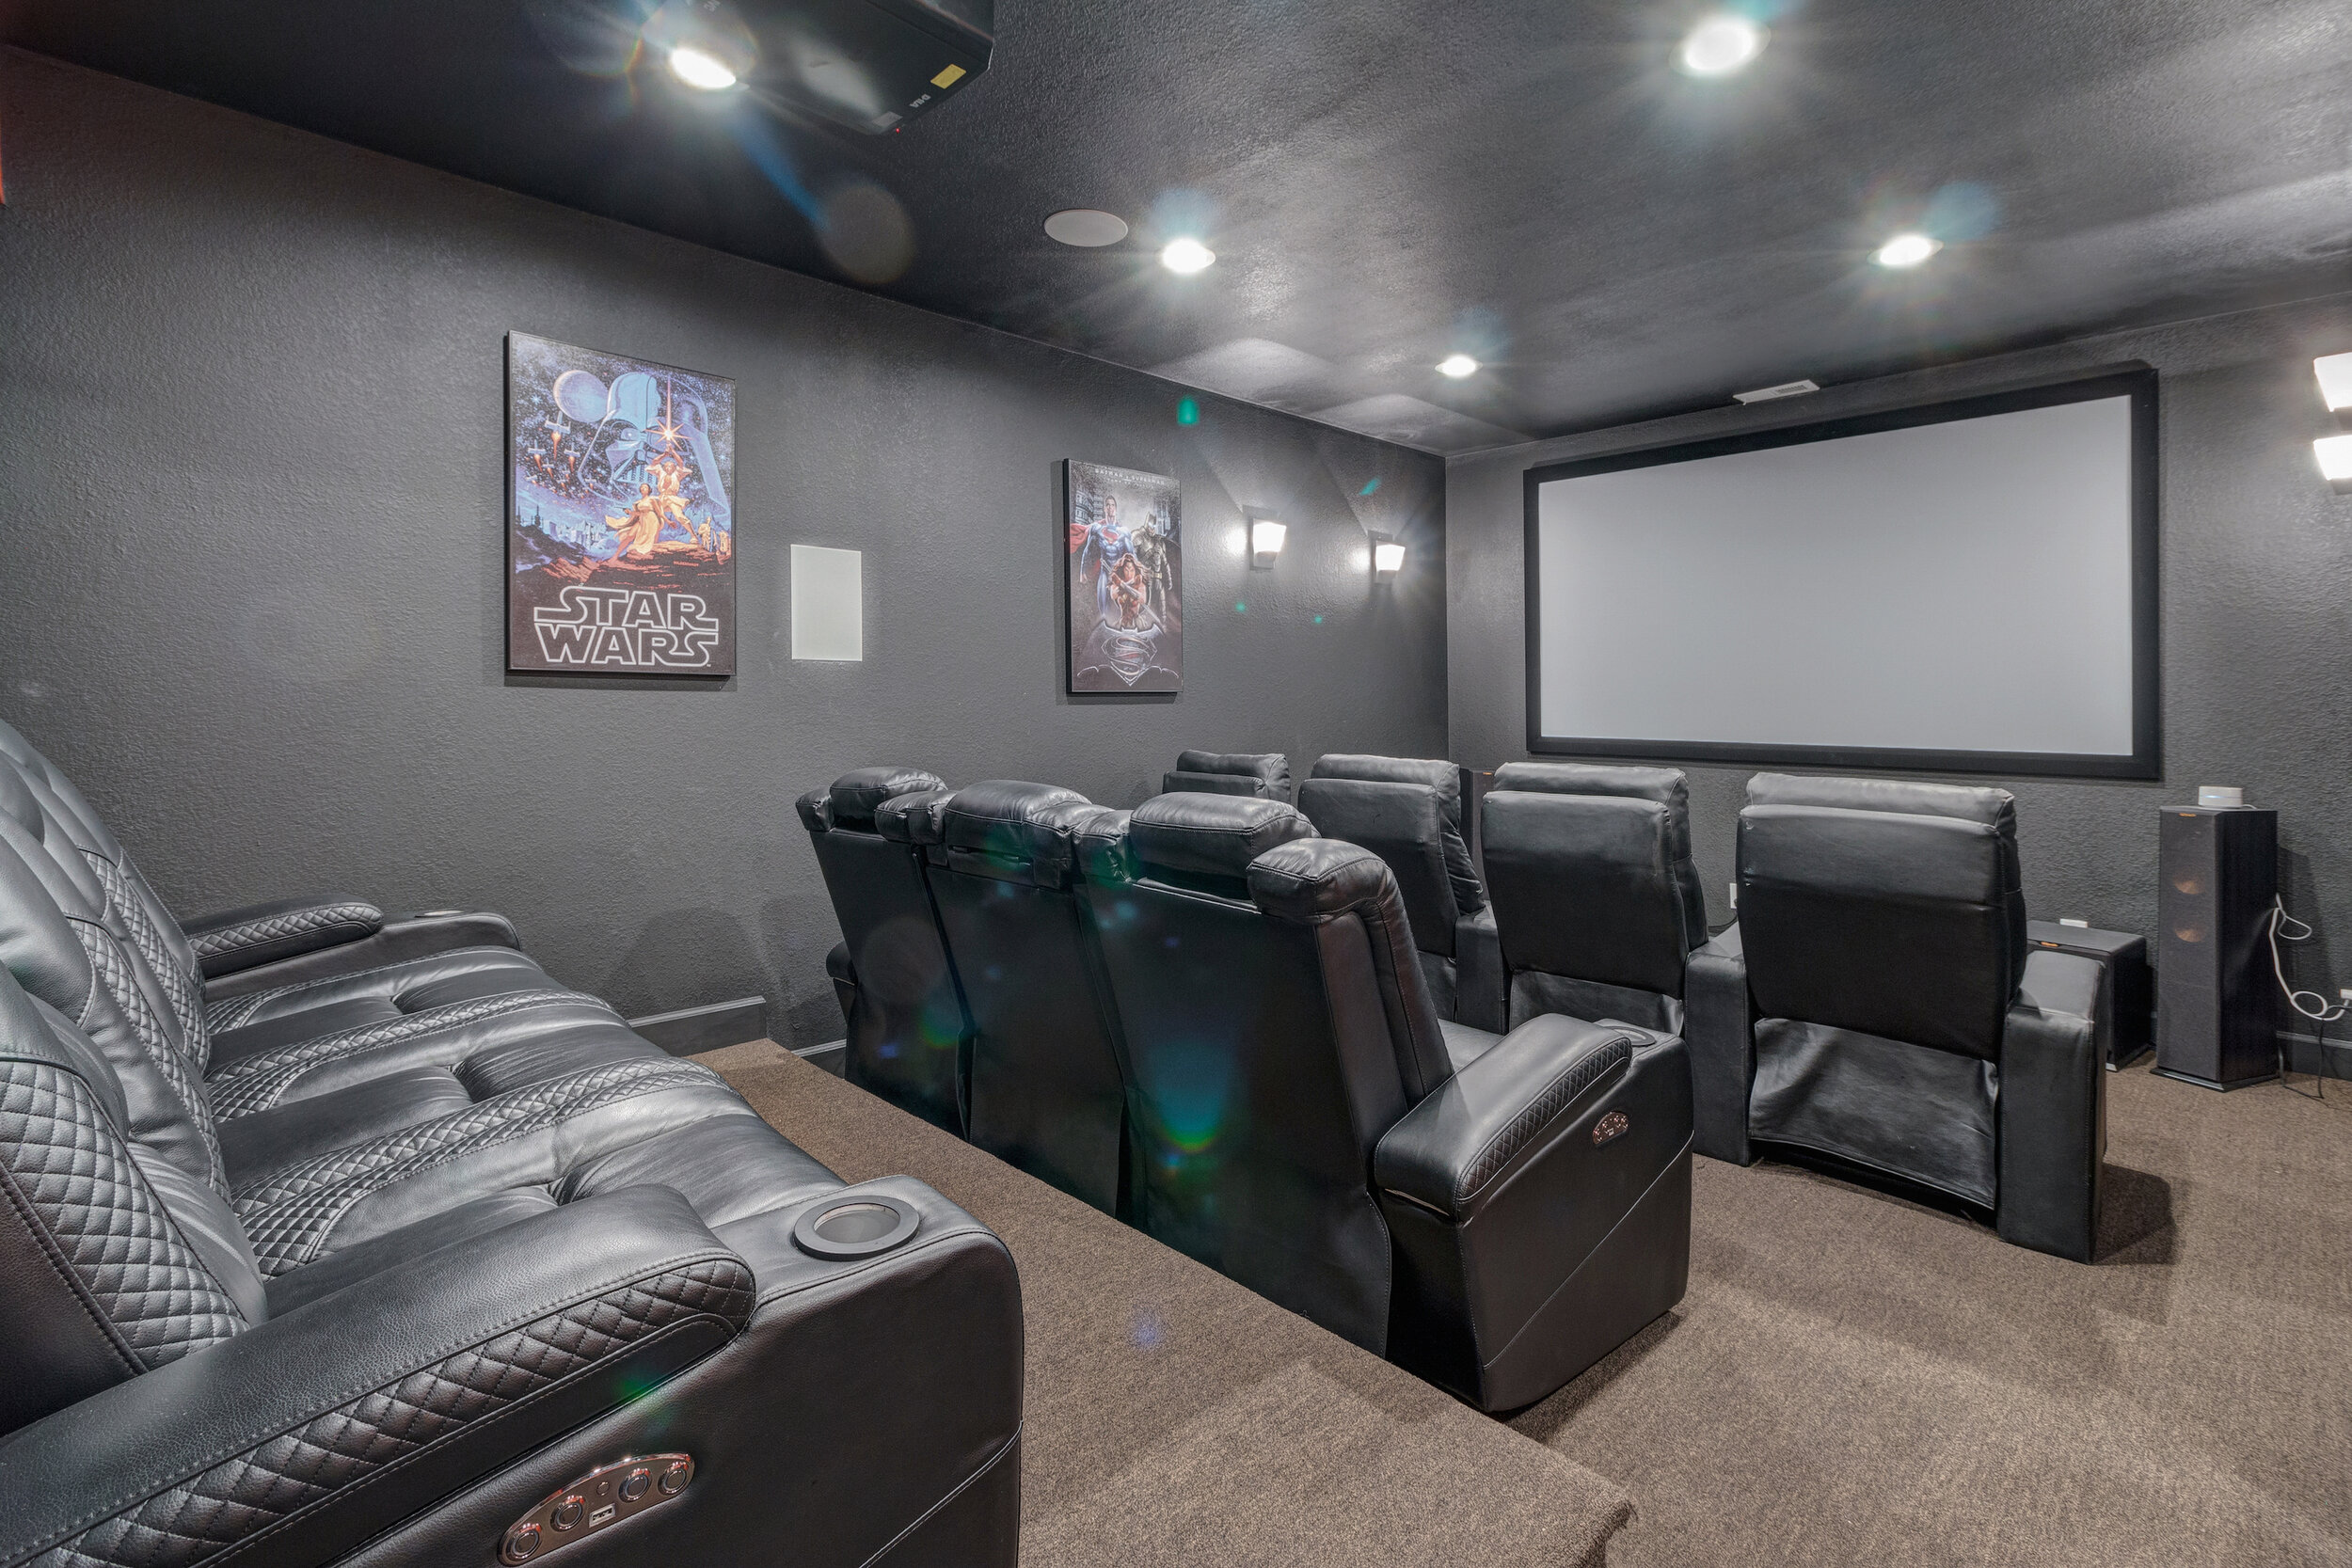 Theater room in basement